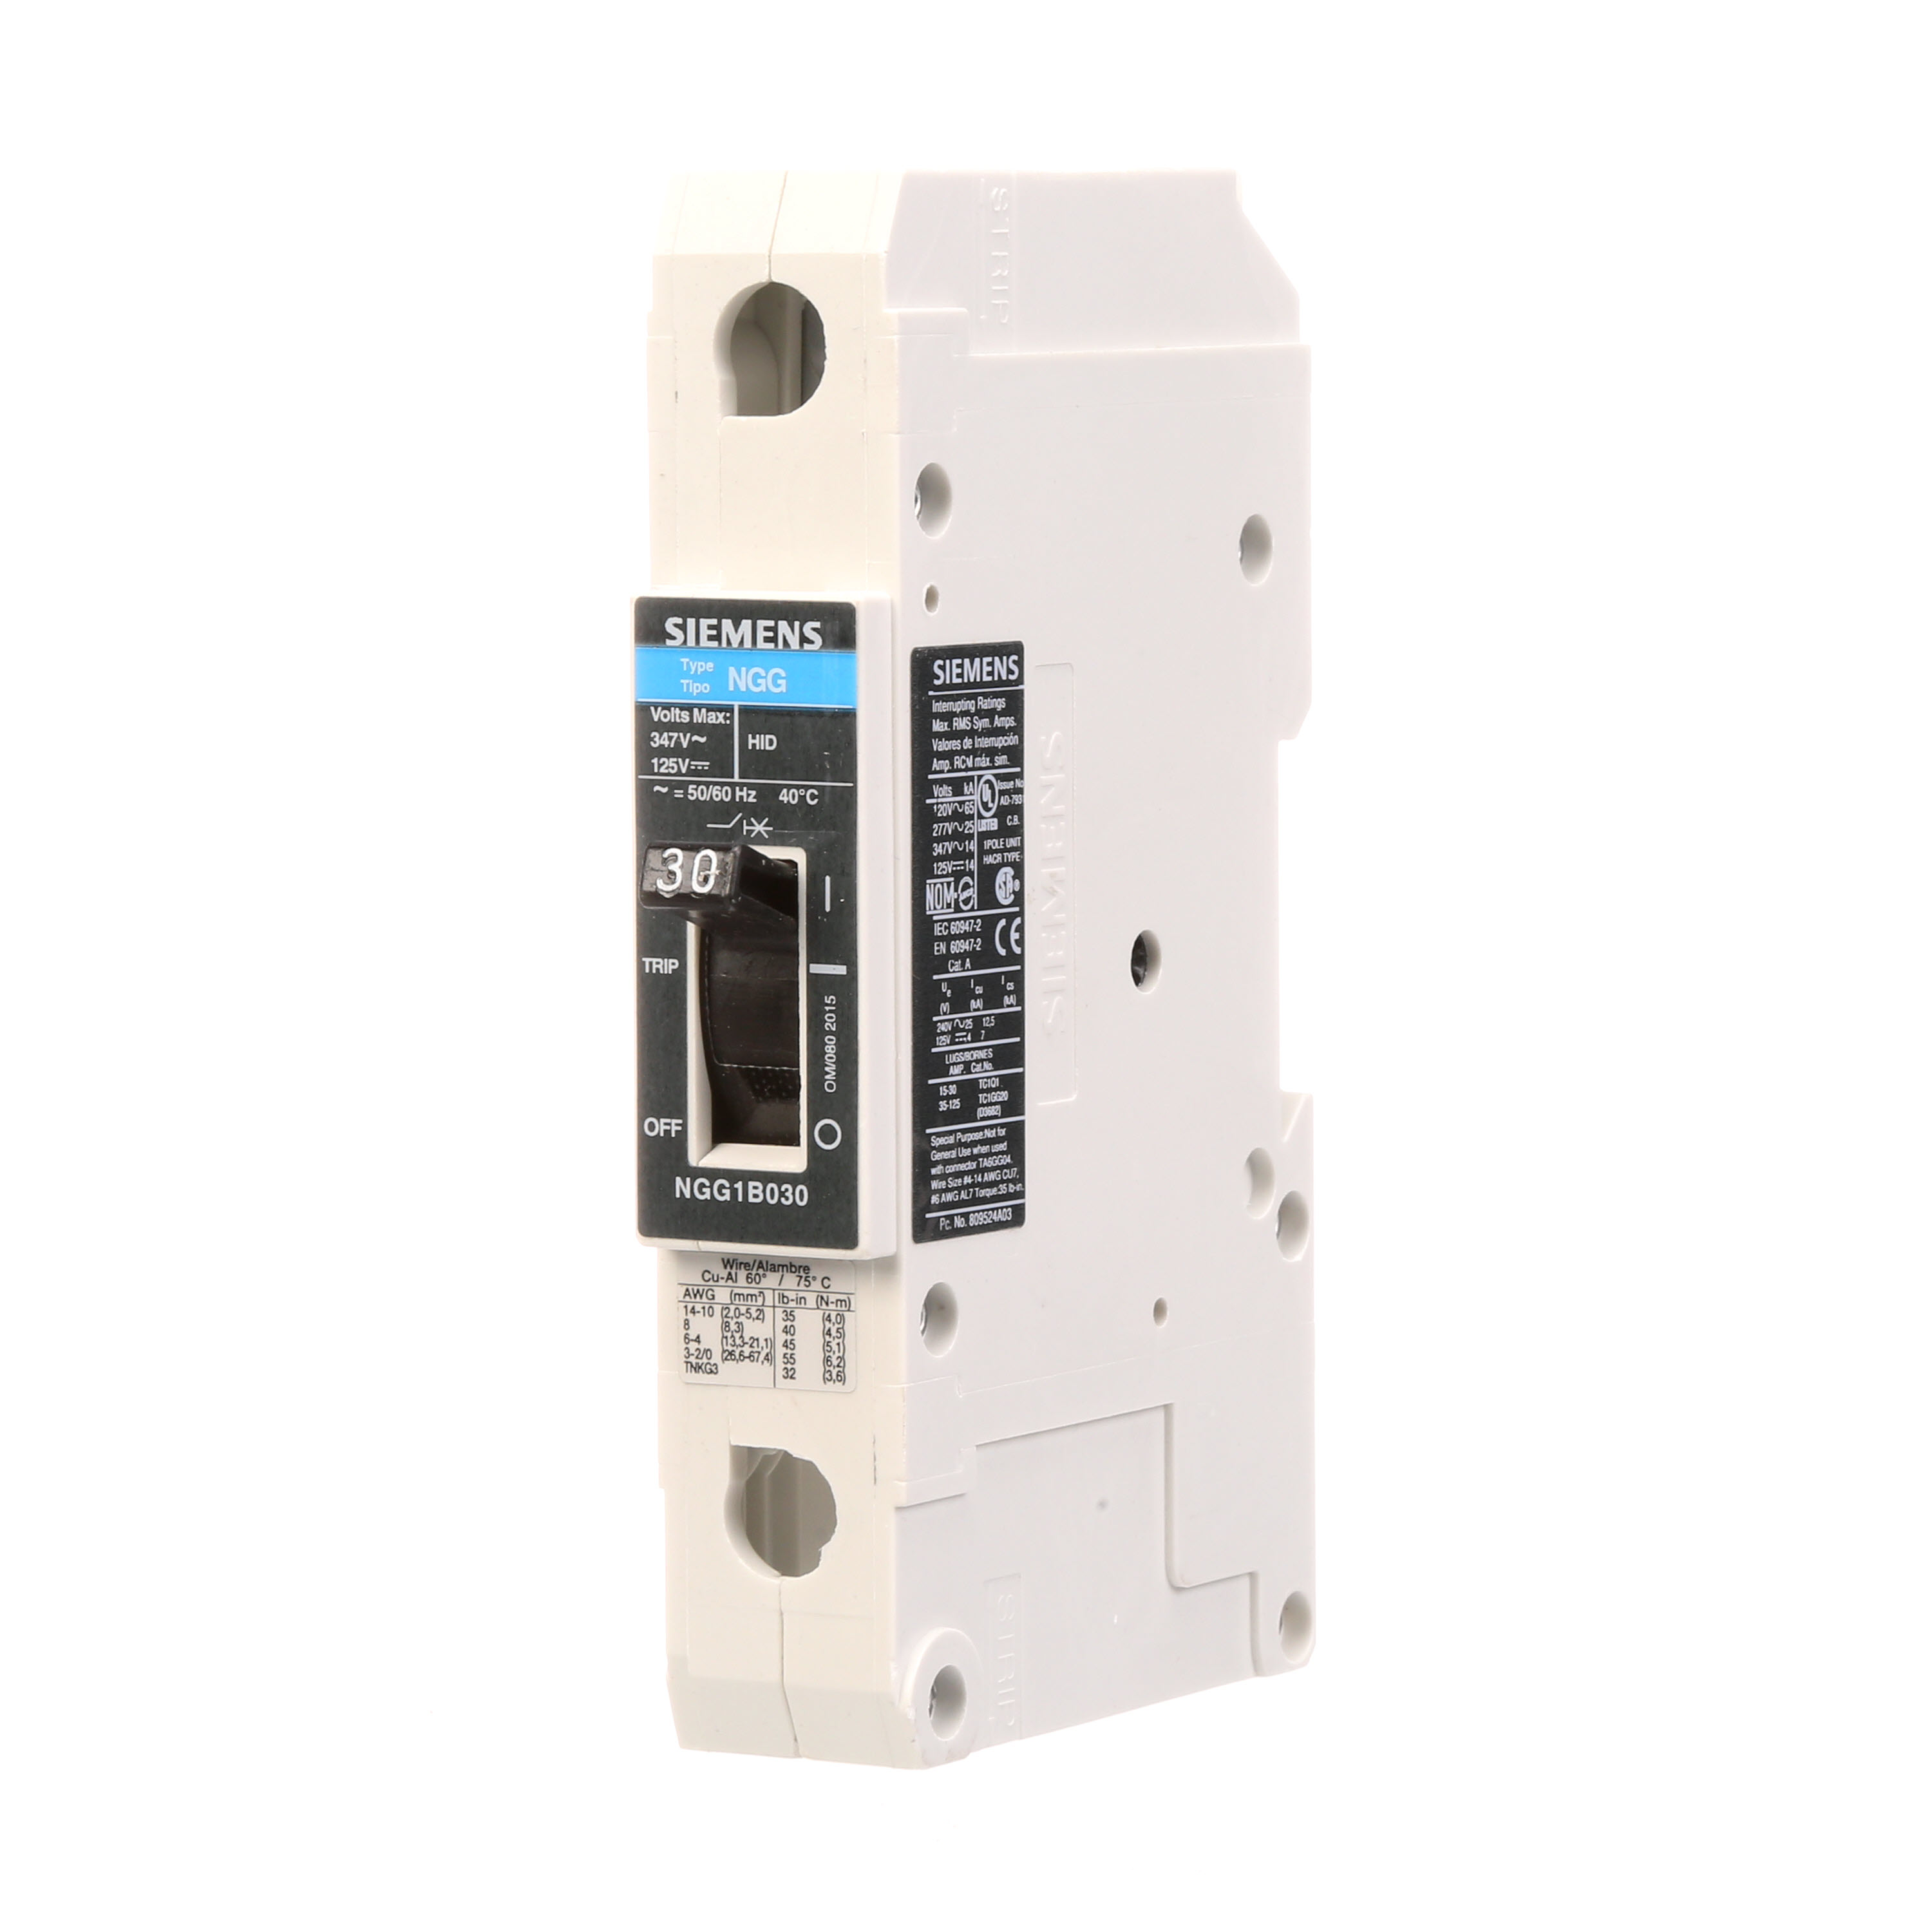 SIEMENS LOW VOLTAGE G FRAME CIRCUIT BREAKER WITH THERMAL - MAGNETIC TRIP. UL LISTED NGG FRAME WITH STANDARD BREAKING CAPACITY. 30A 1-POLE (14KAIC AT 347V) (25KAIC AT 277V). SPECIAL FEATURES MOUNTS ON DIN RAIL / SCREW, NO LUGS. DIMENSIONS (W x H x D) IN 1 x 5.4 x 2.8.